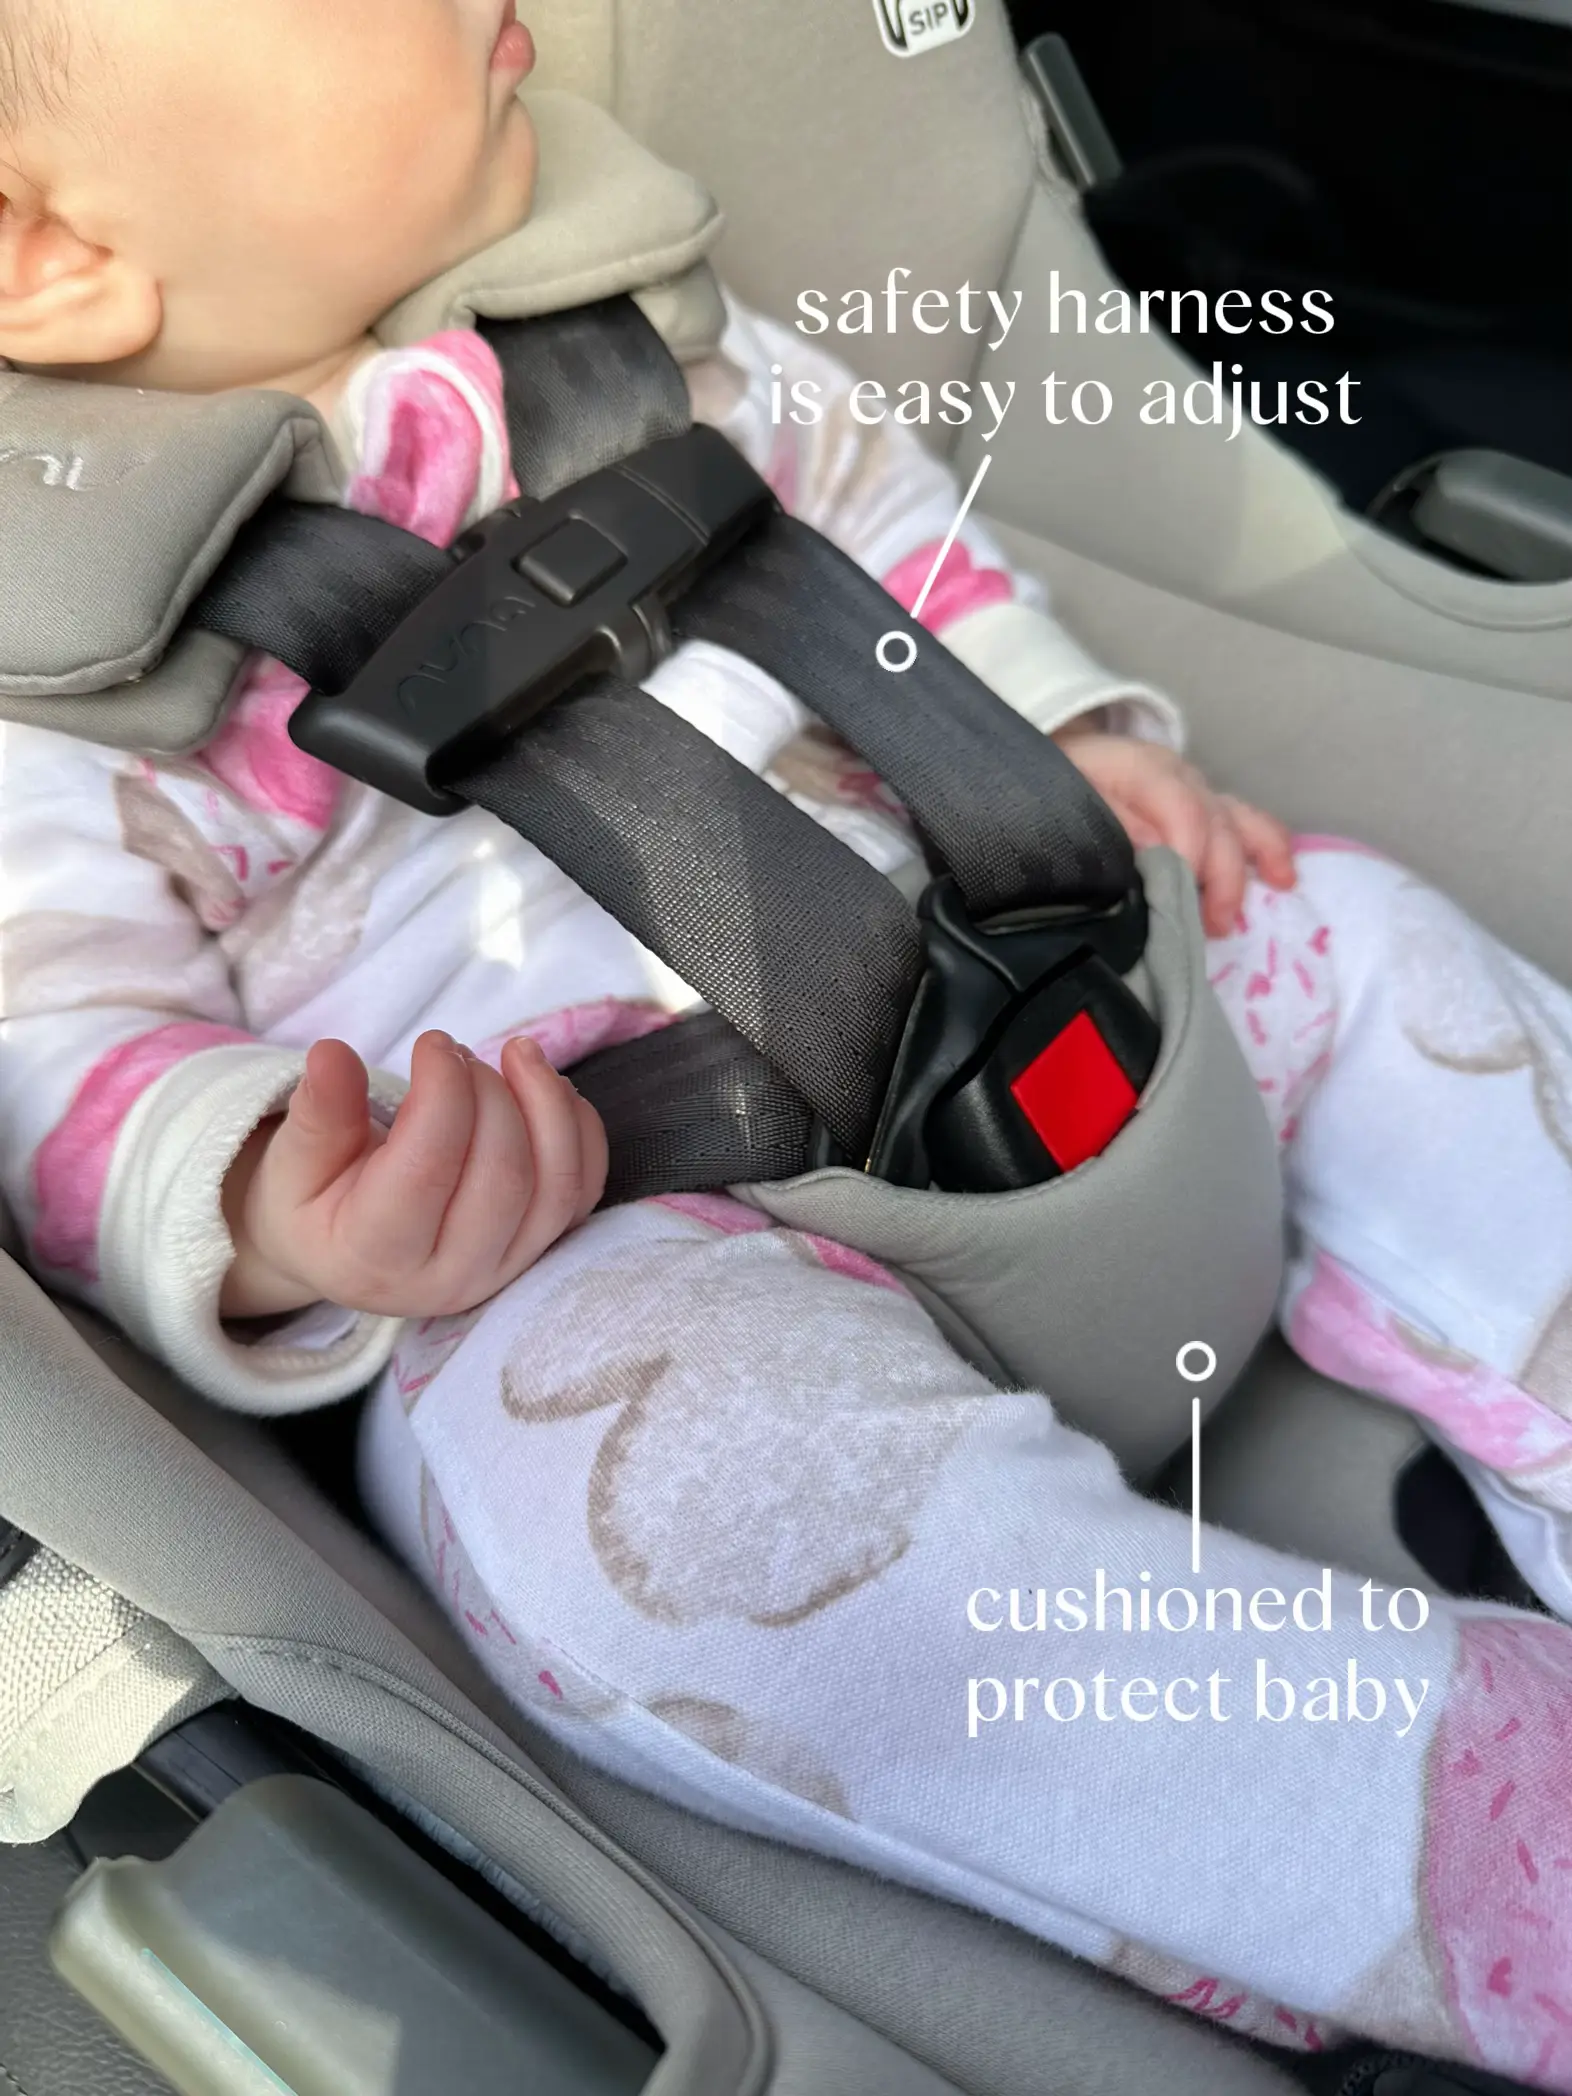  A baby is in a car seat with a safety harness and cushions.